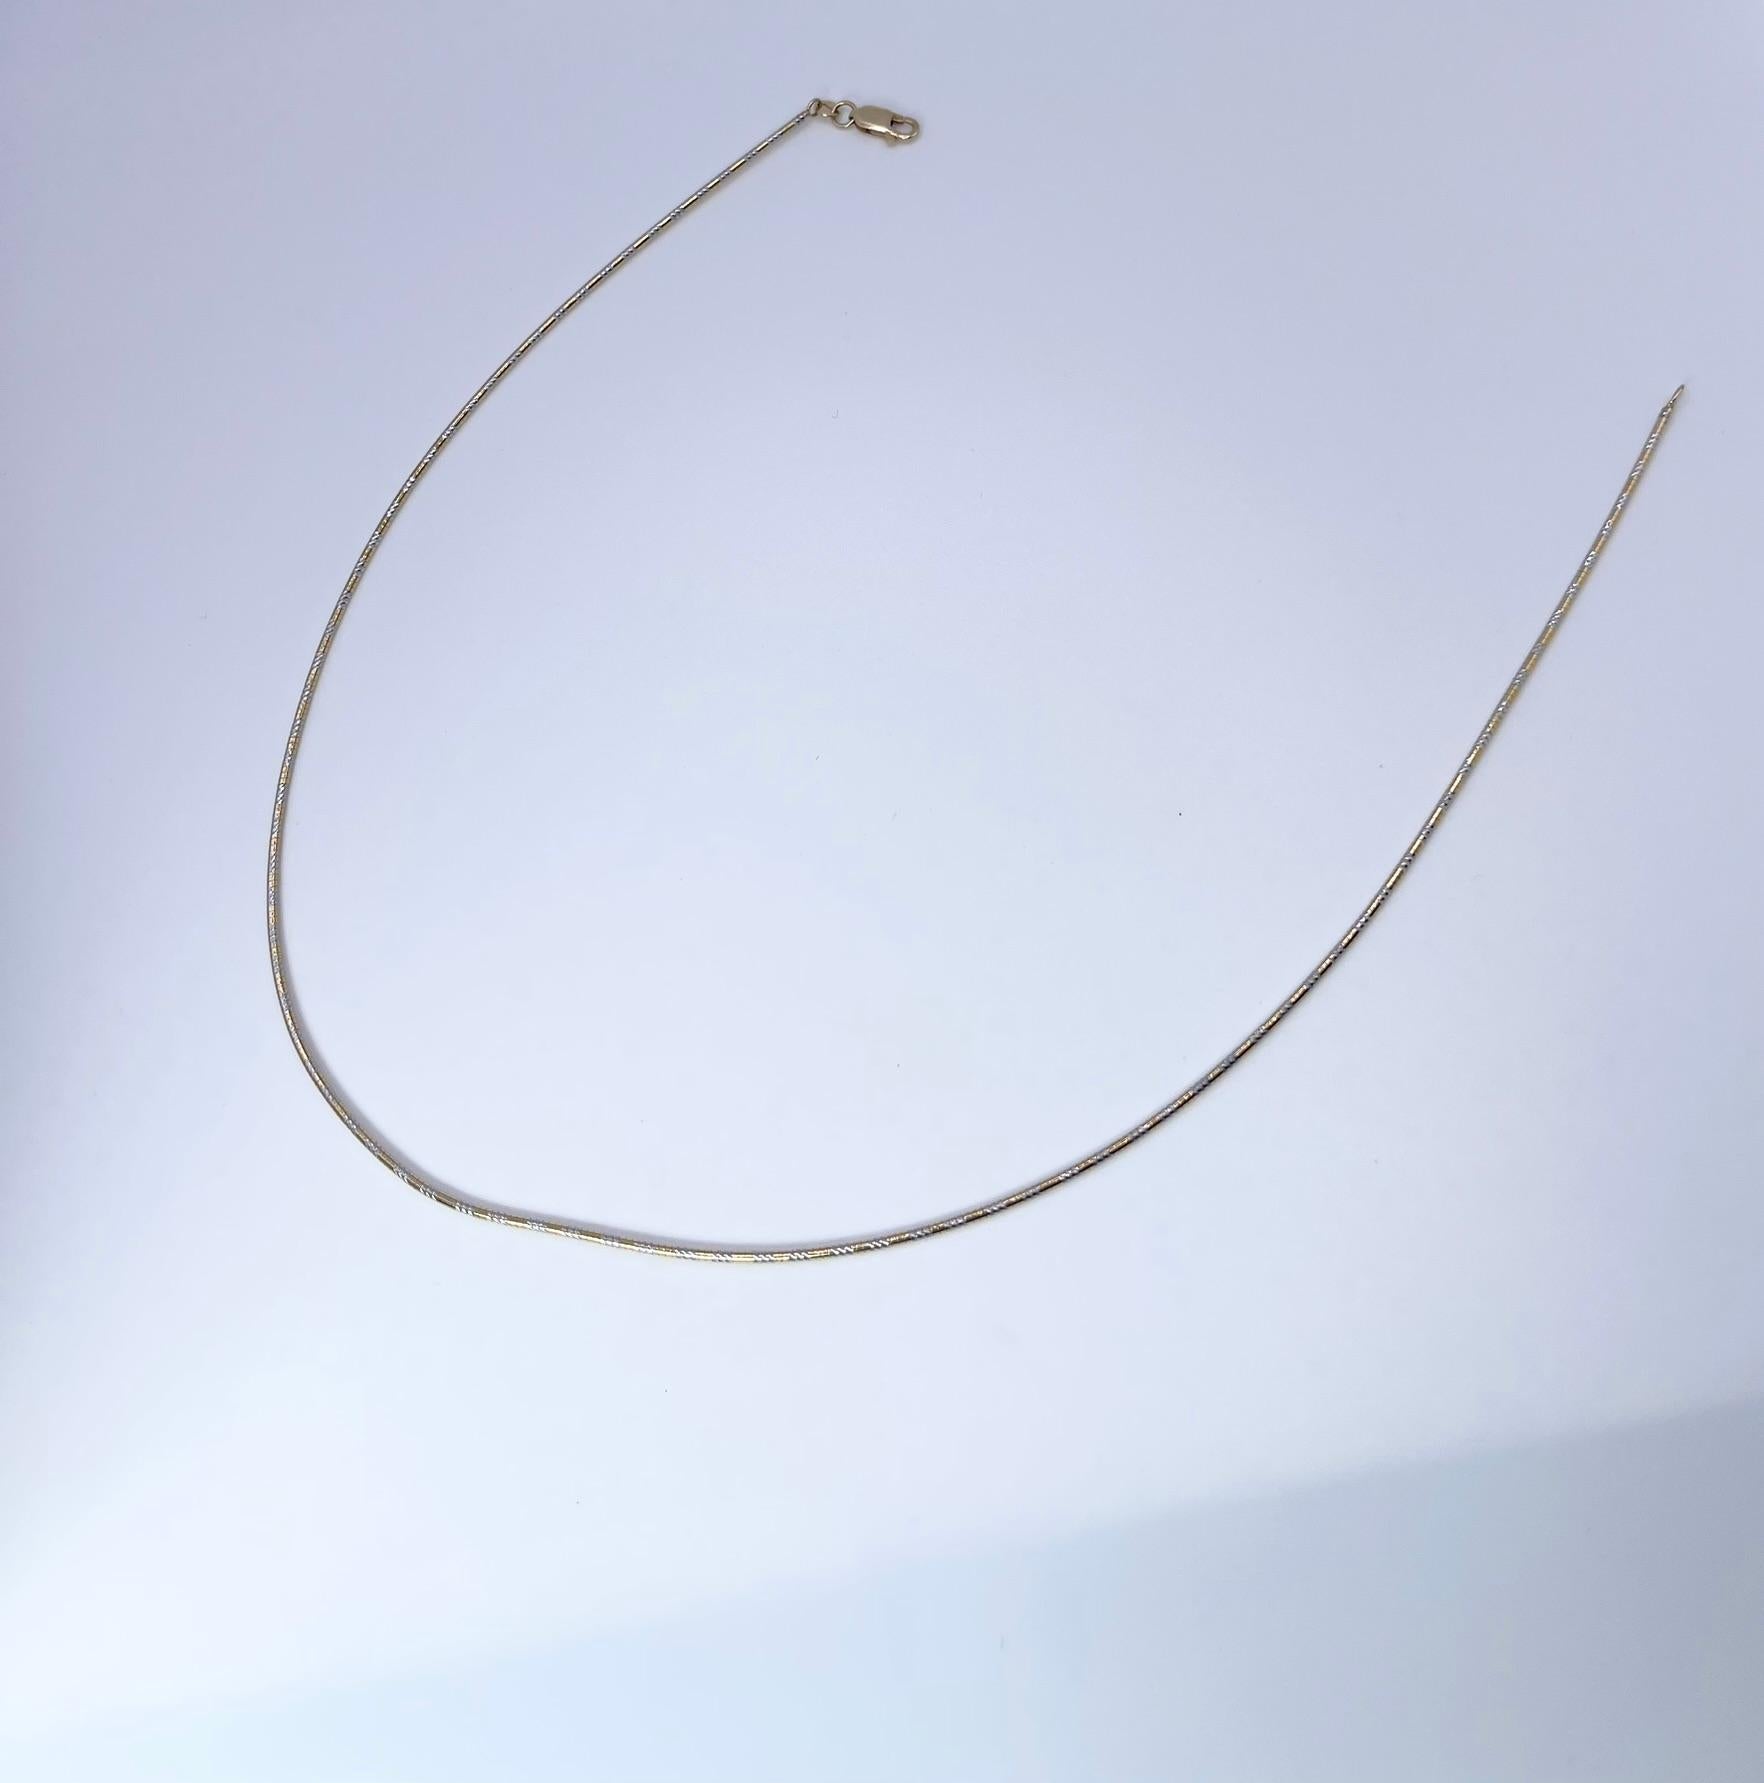 Snake gold chain 14KT white and yellow gold, plain solid chain 18 inches.

GRAM WEIGHT: 7.16gr
GOLD: 14KT gold
CLOSURE: Lobster
WIDTH: 1.5MM
LENGTH: 18